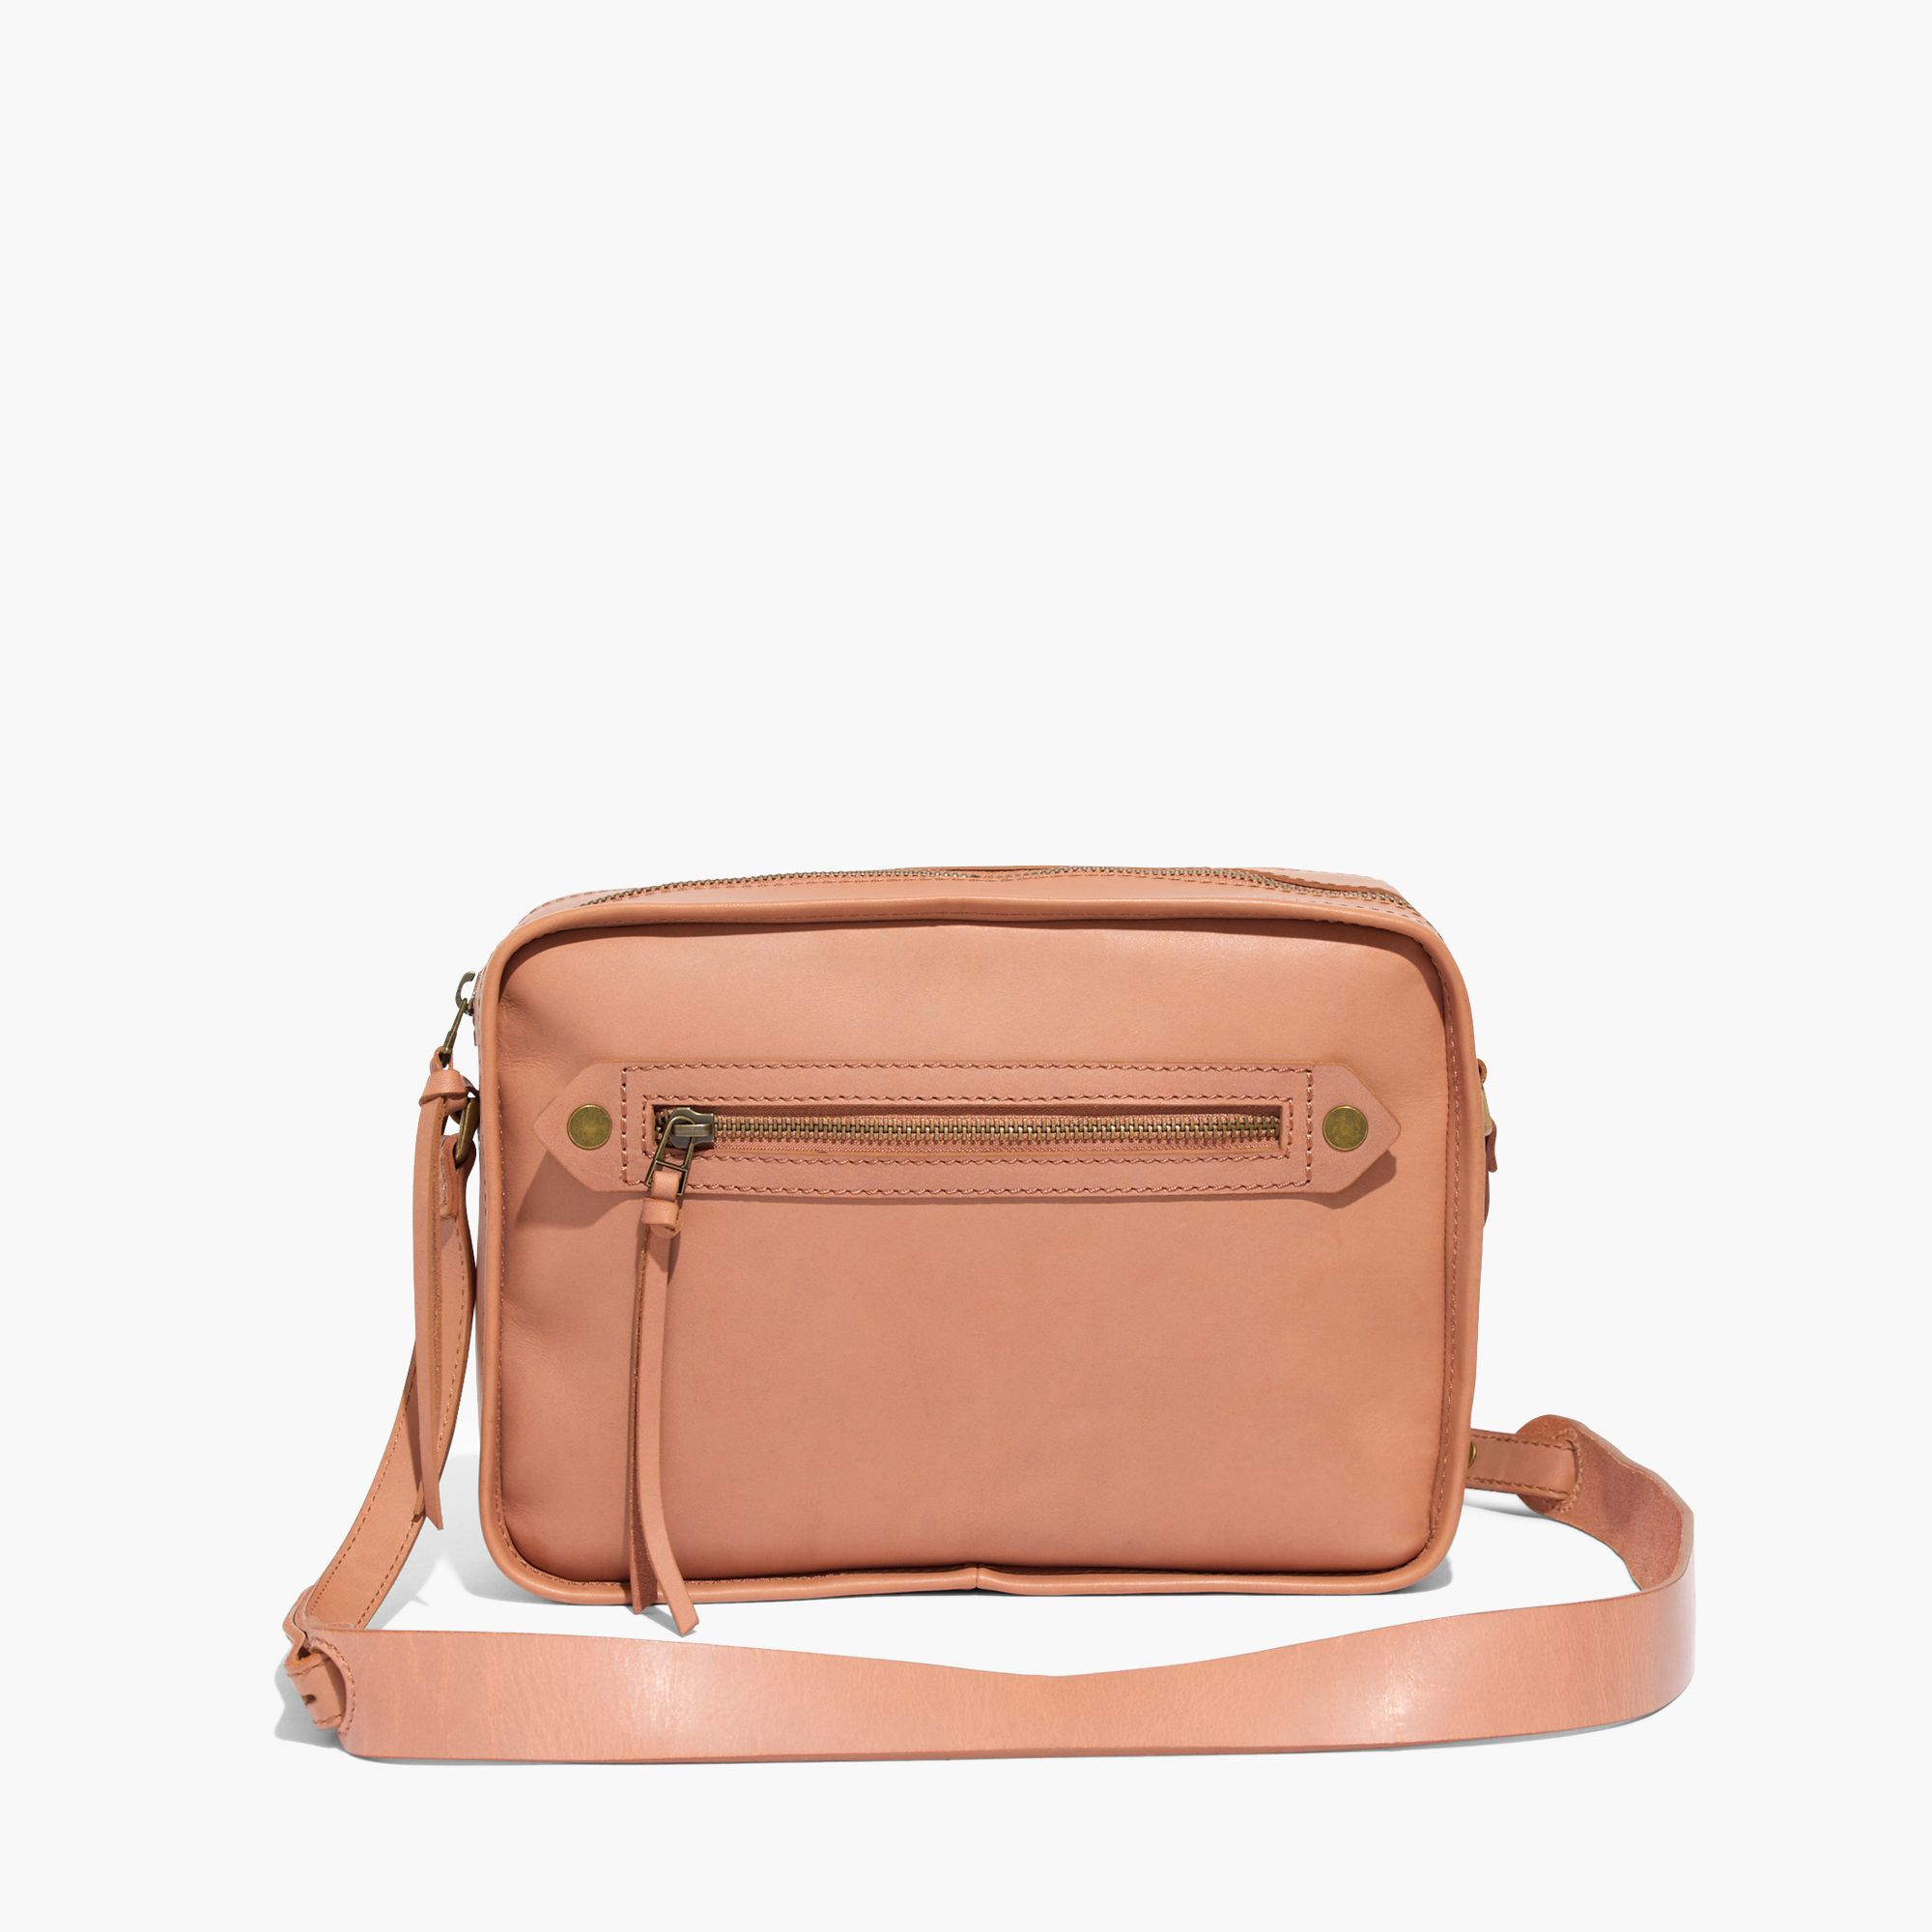 Madewell Leather The Brisbane Camera Bag in Natural - Lyst